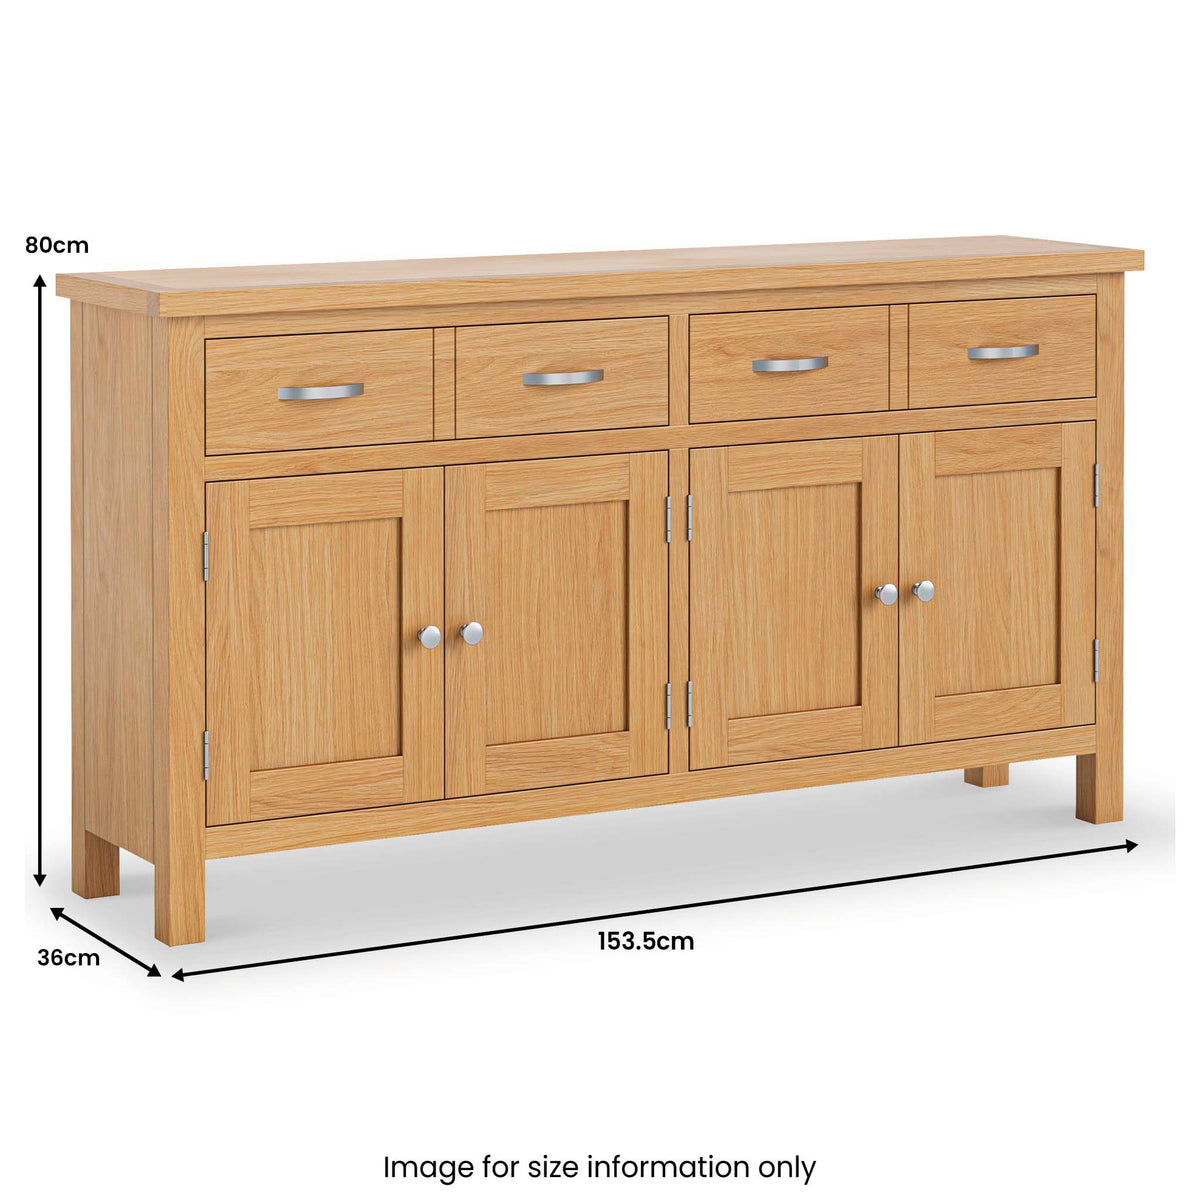 London Oak Extra Large Sideboard Cabinet dimensions